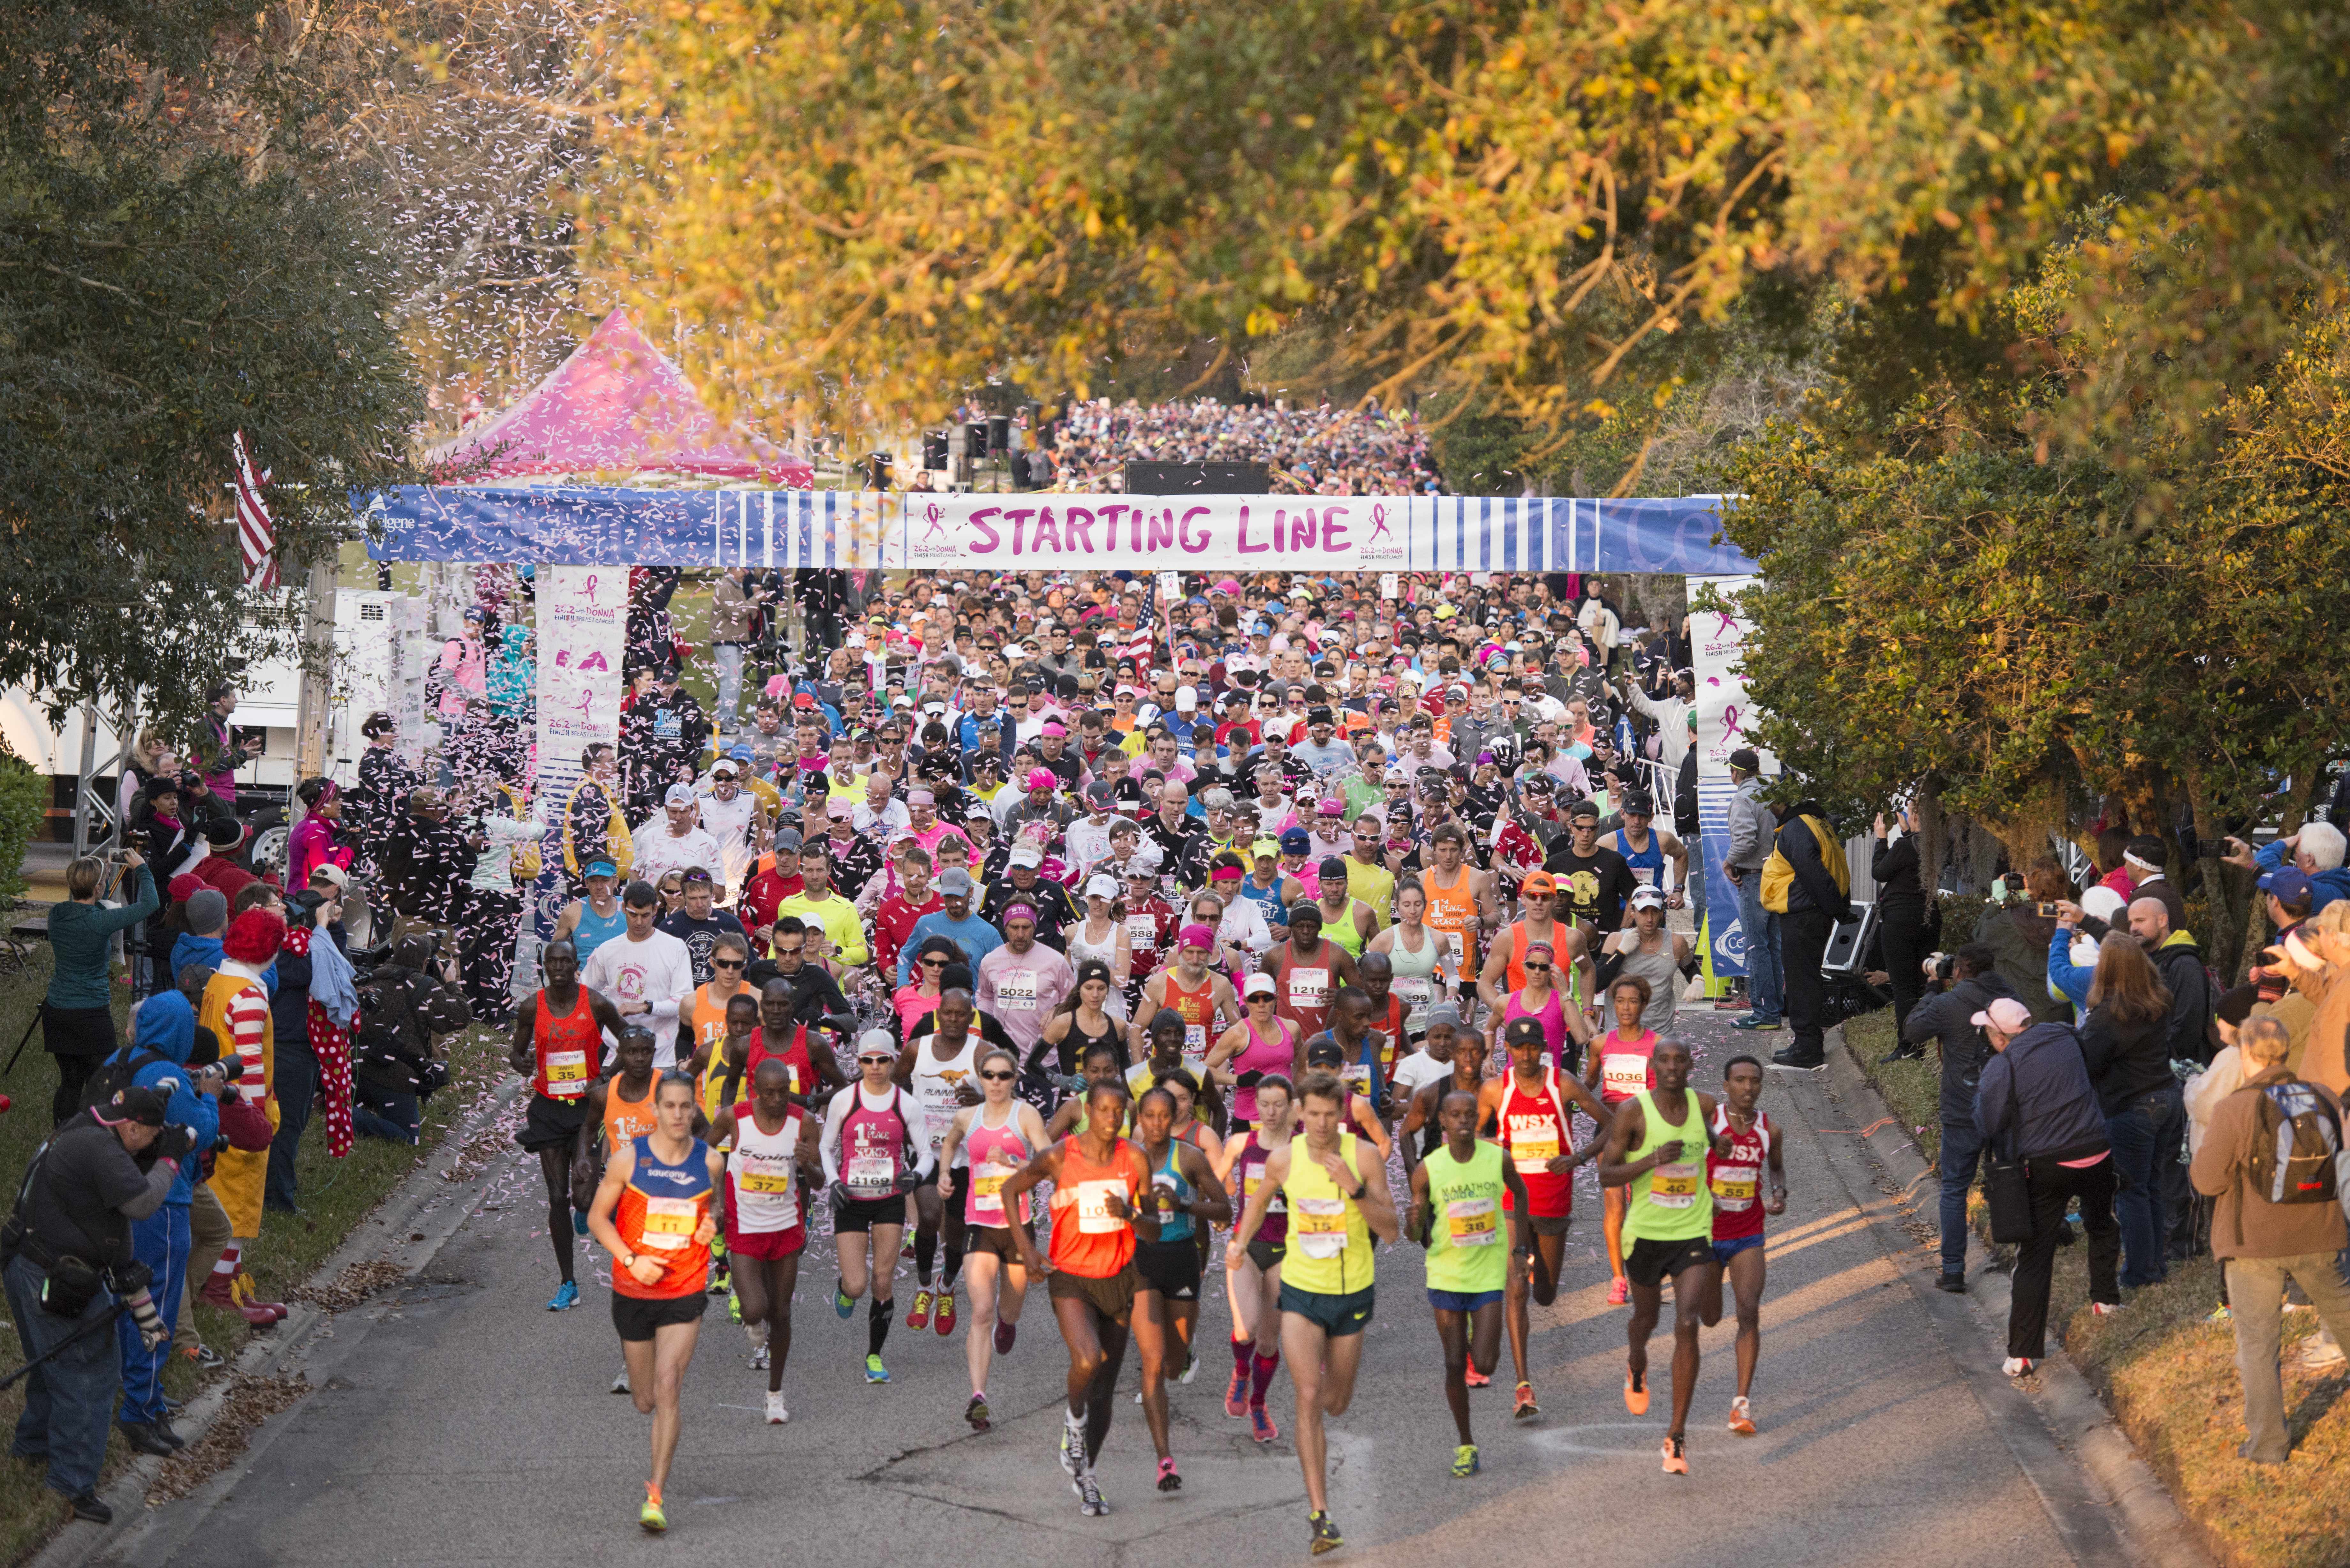 runners at the starting line in the Donna Breast Cancer Marathon